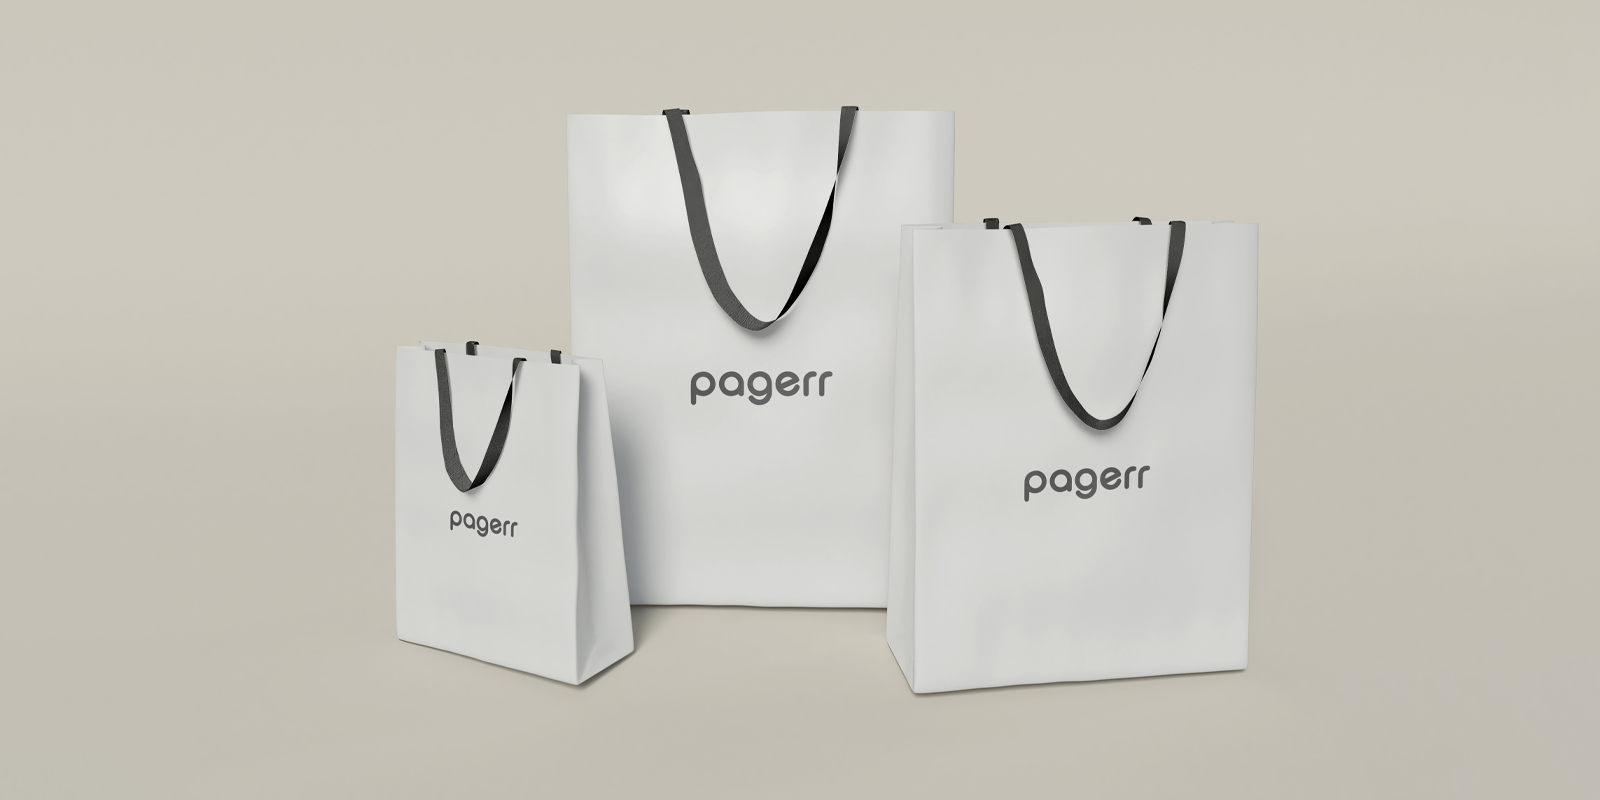 Shopping bags in Valencia - Print with Pagerr